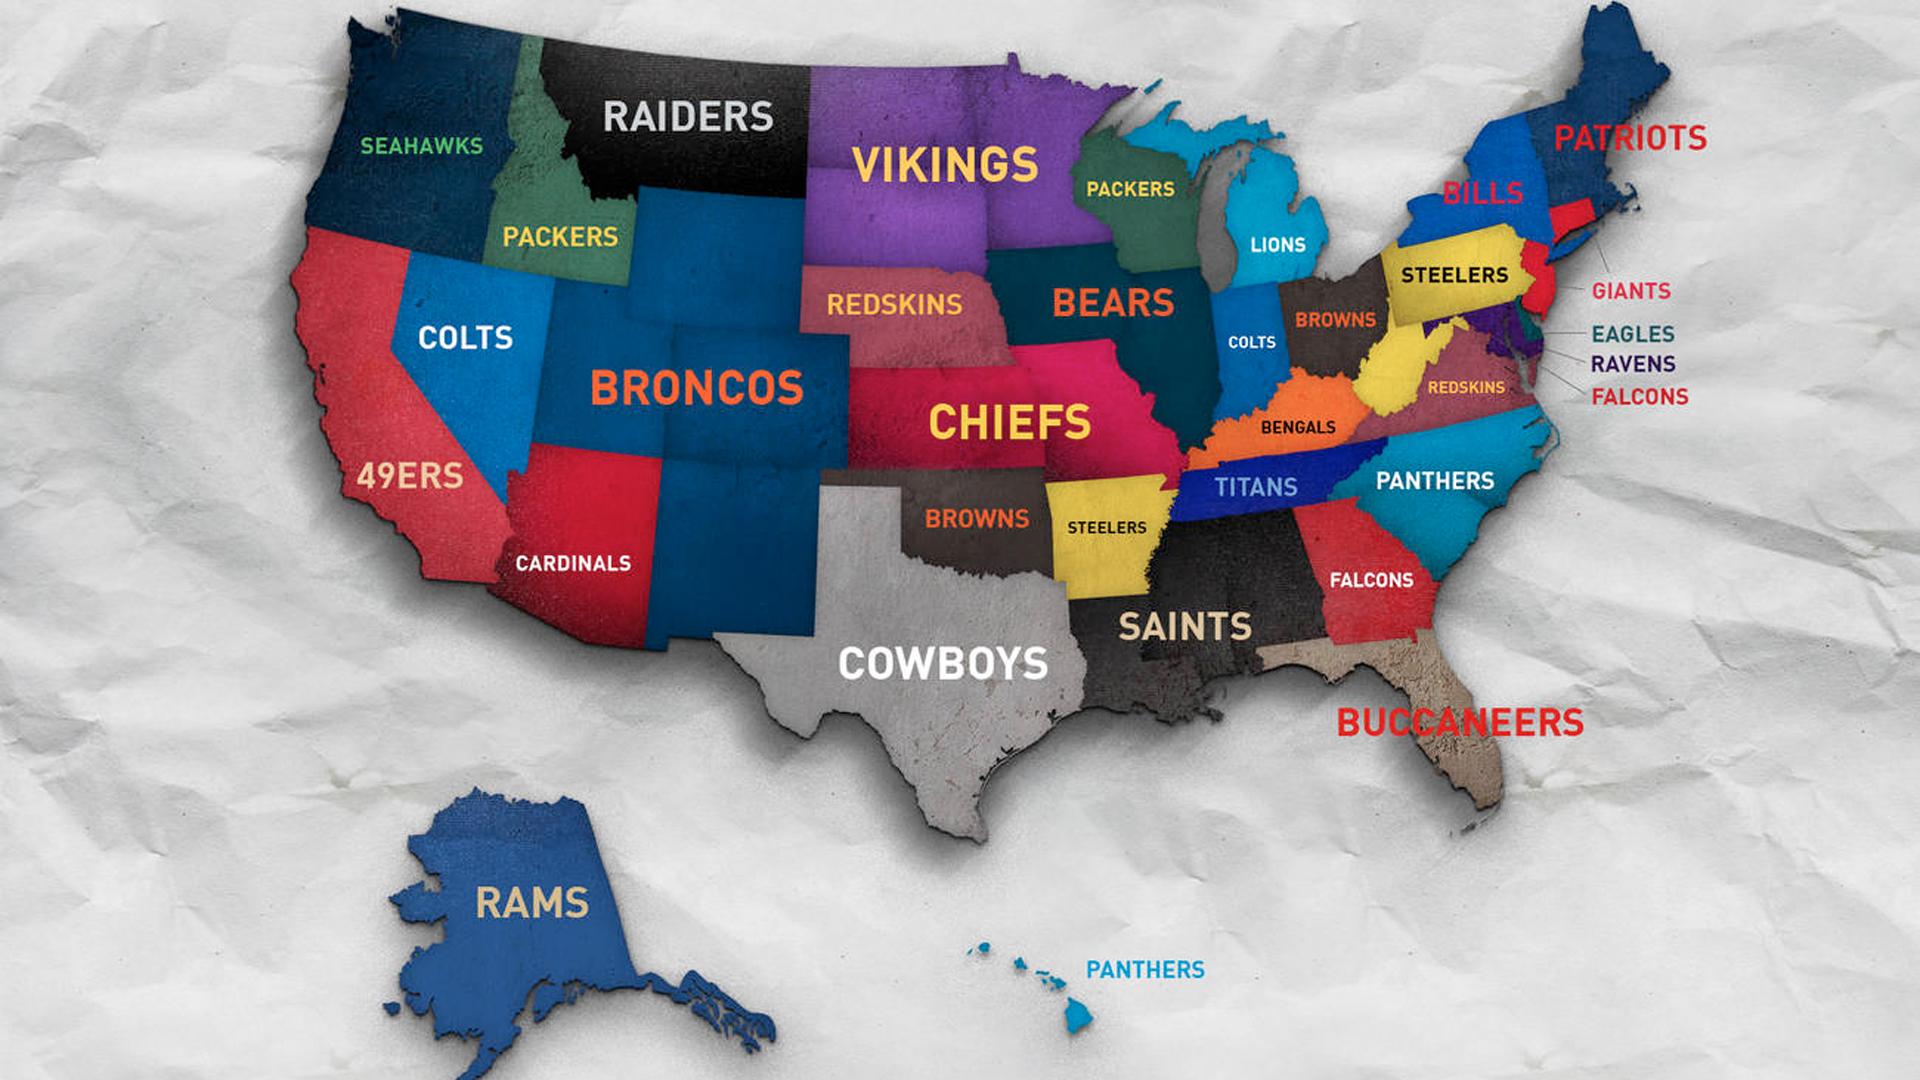 Will the NFL expand to other cities, and if so, which ones?